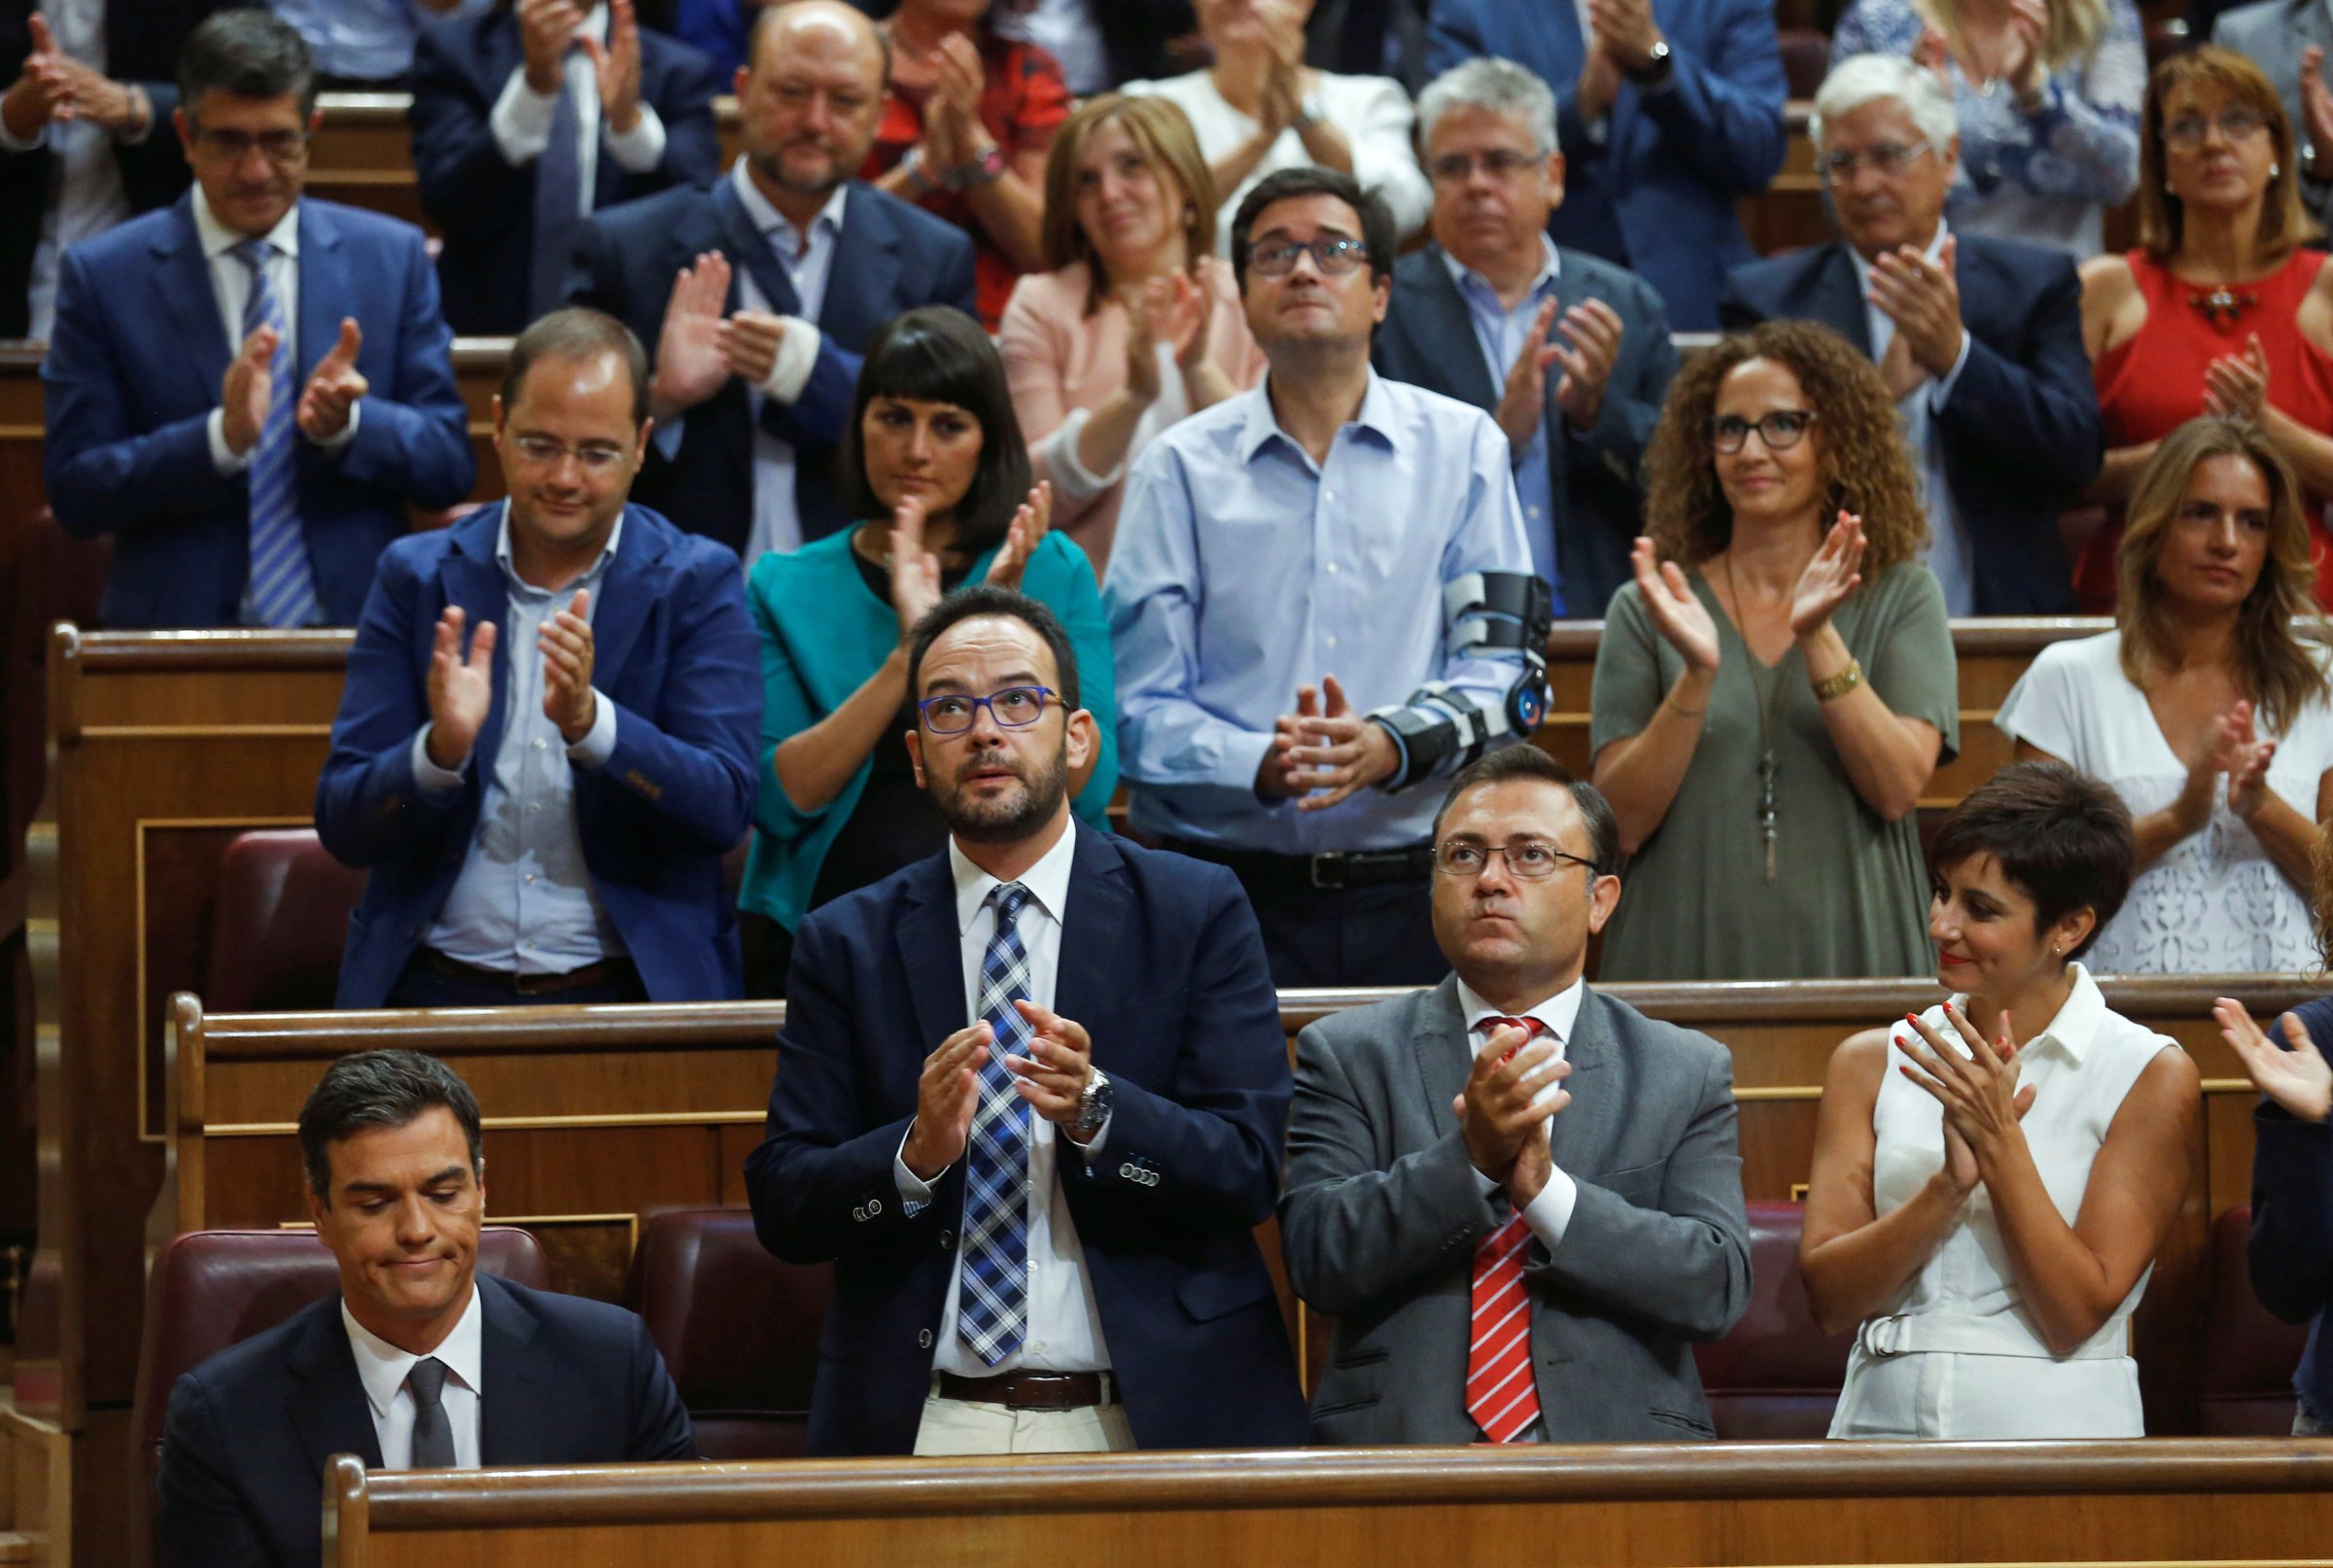 Spain's Socialist party leader Sanchez is applauded by party members after delivering a speech at parliament in Madrid